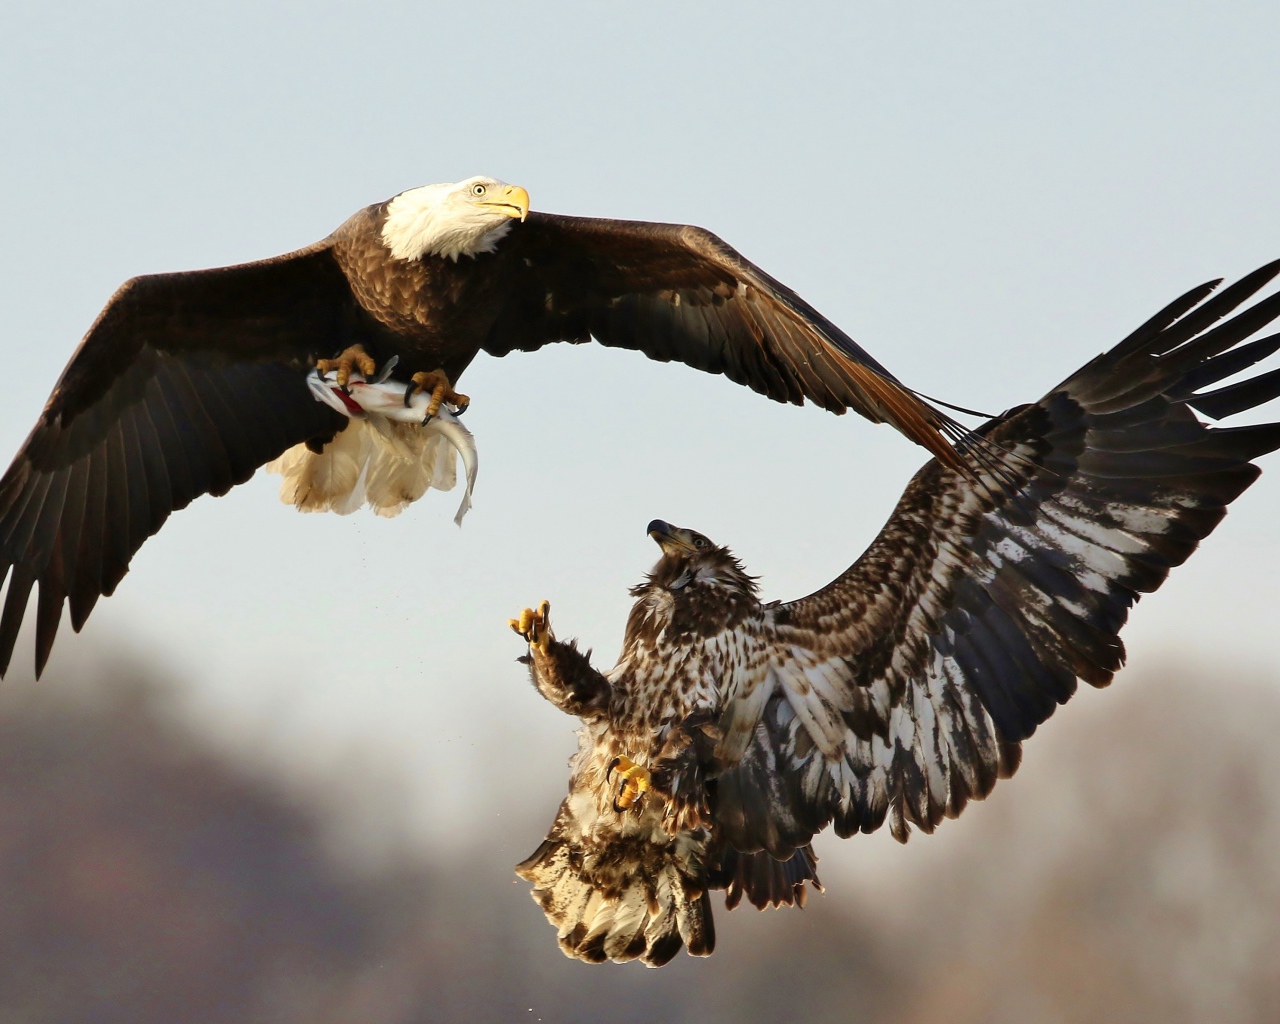 Two birds of prey fight in the air